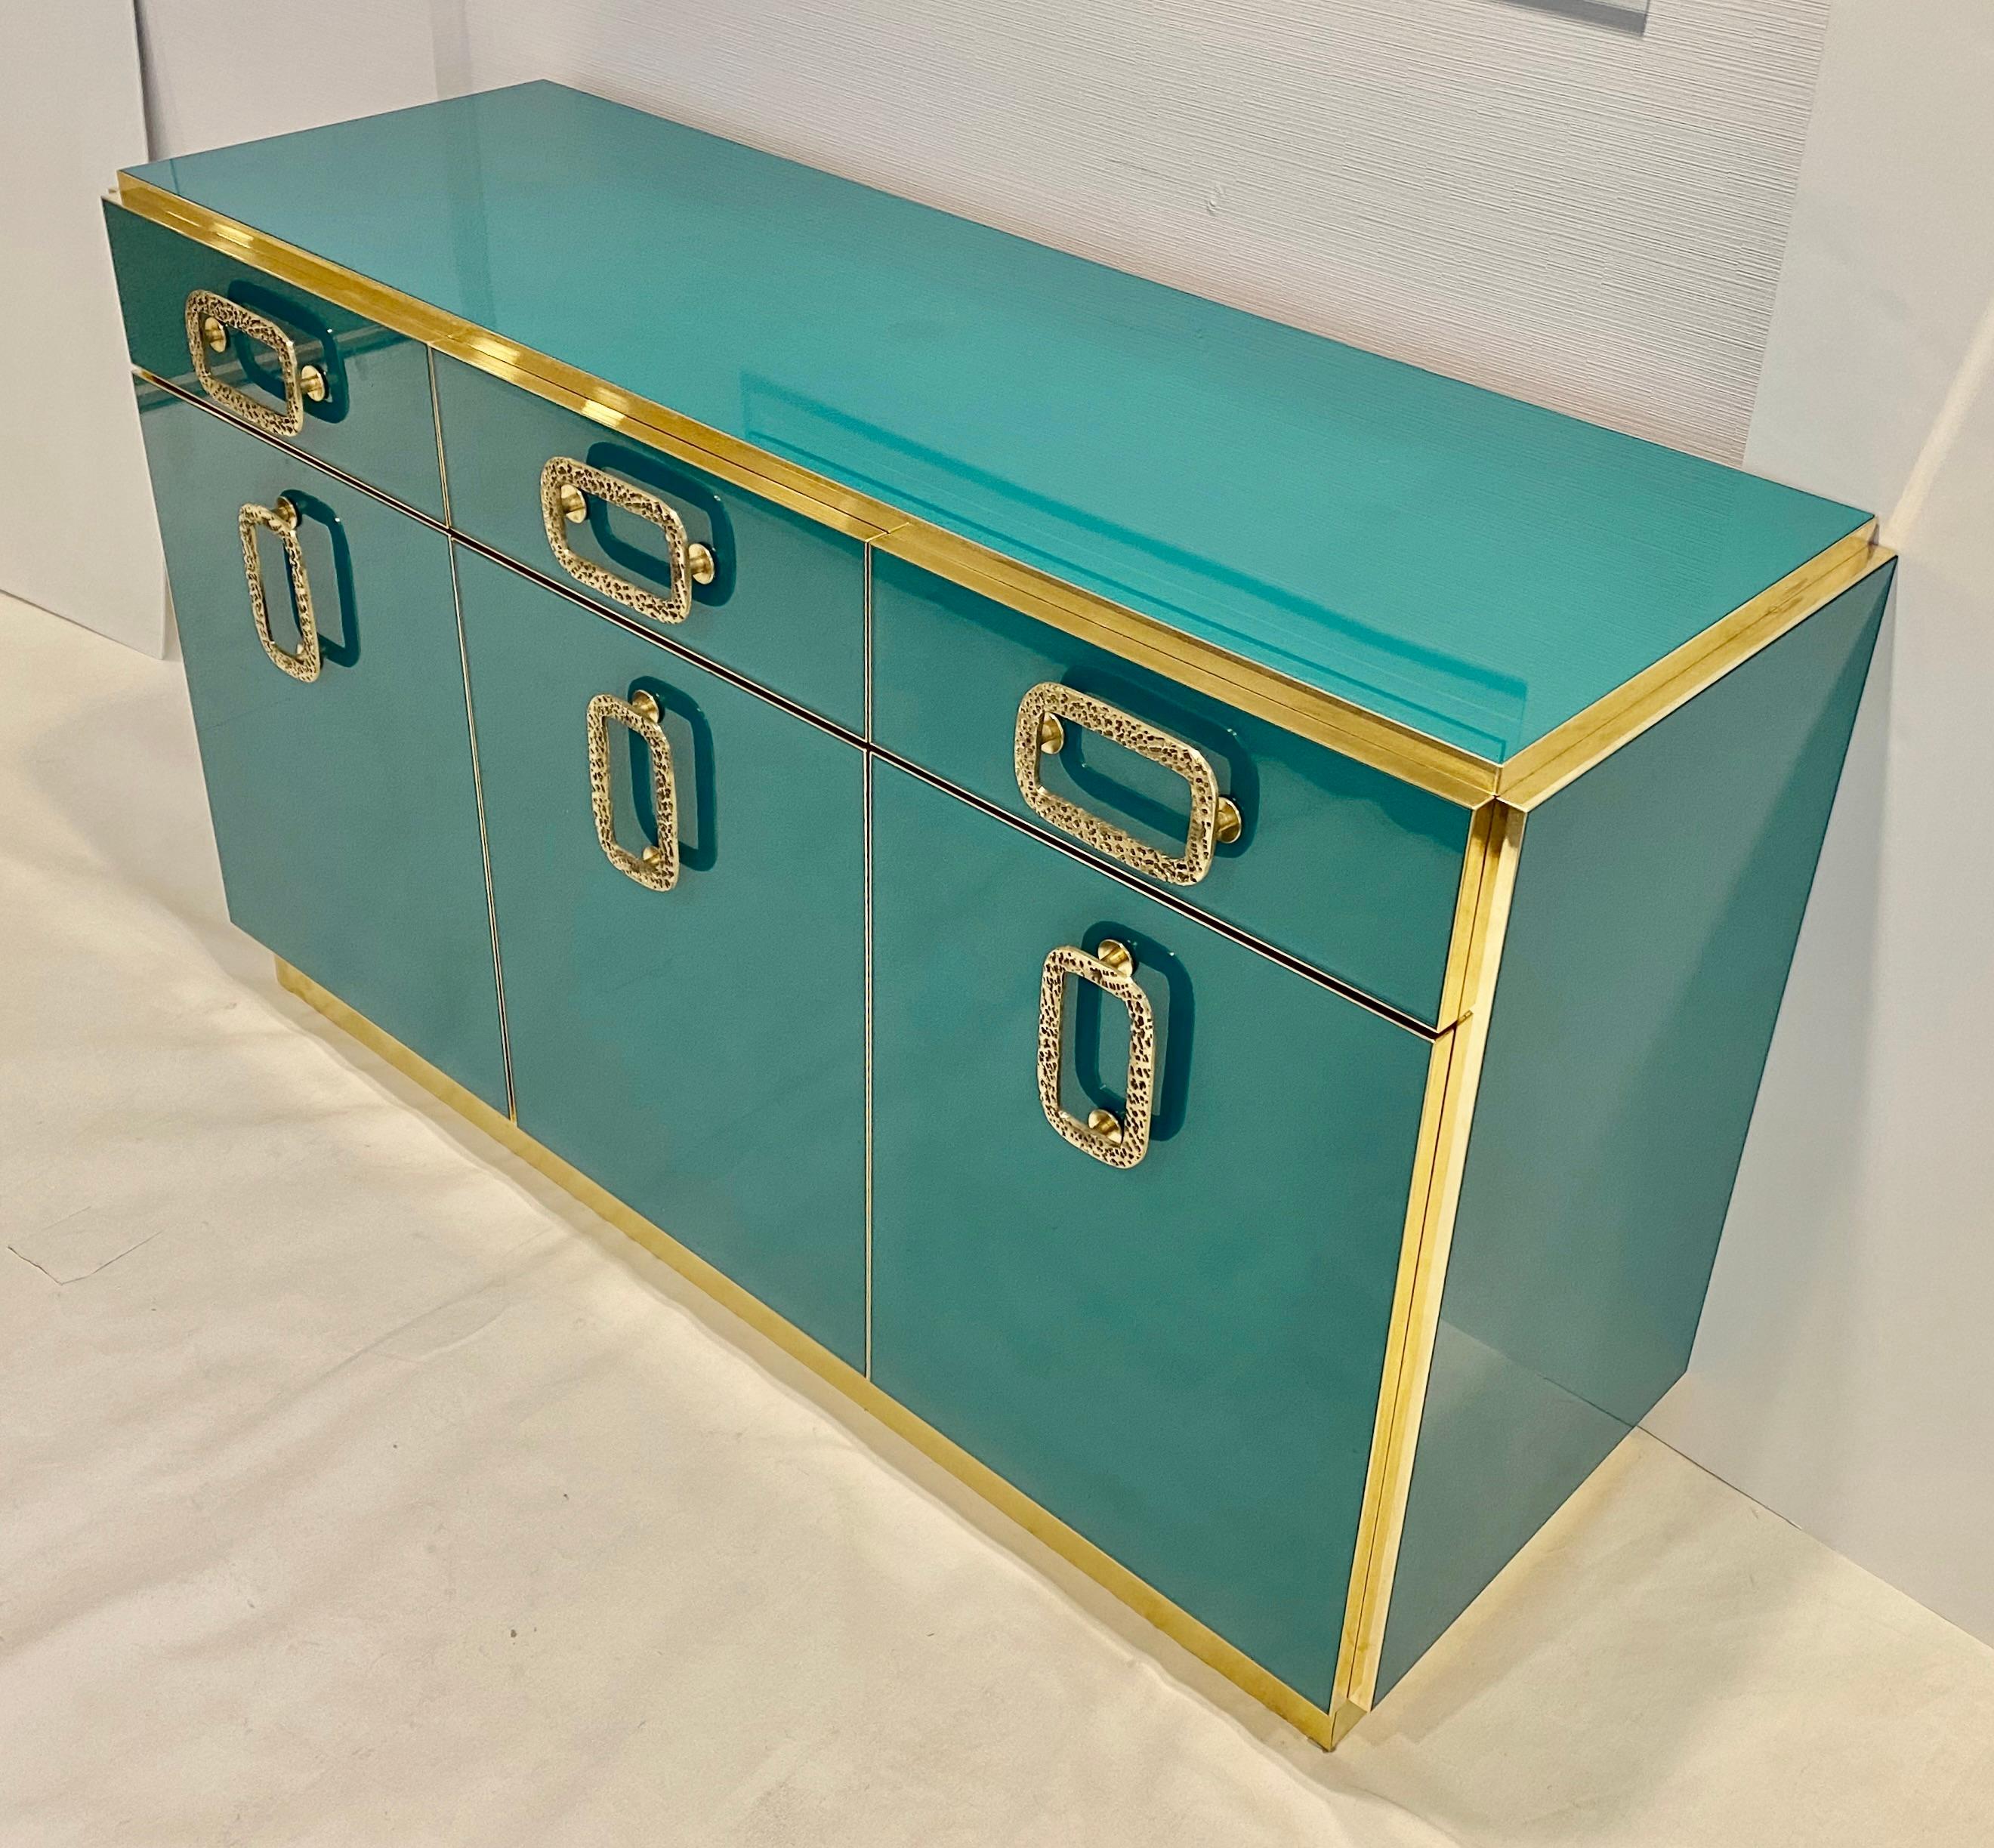 Let's bring inside some shimmering elegance! What is special about this piece, it's not only the functionality with 3 drawers and 3 doors (options for sizes) but the artistic impact with metallic hues (very difficult to photograph as they change